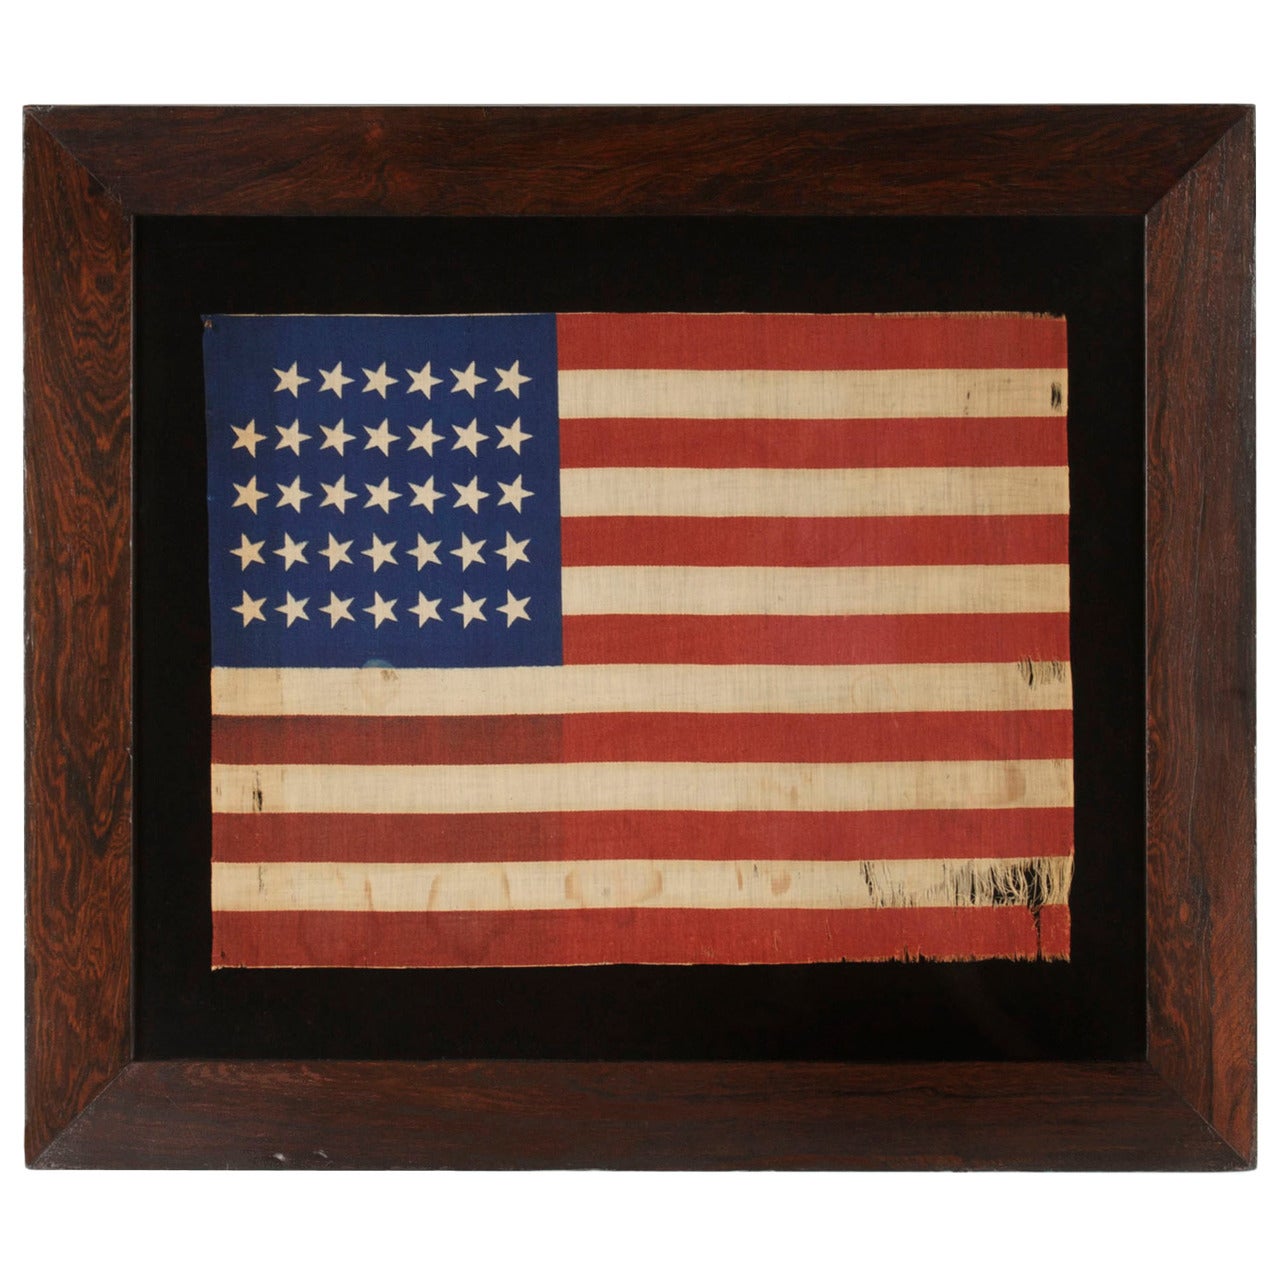 34 Star Flag, Civil War Period, Printed on A Wool Blended Fabric